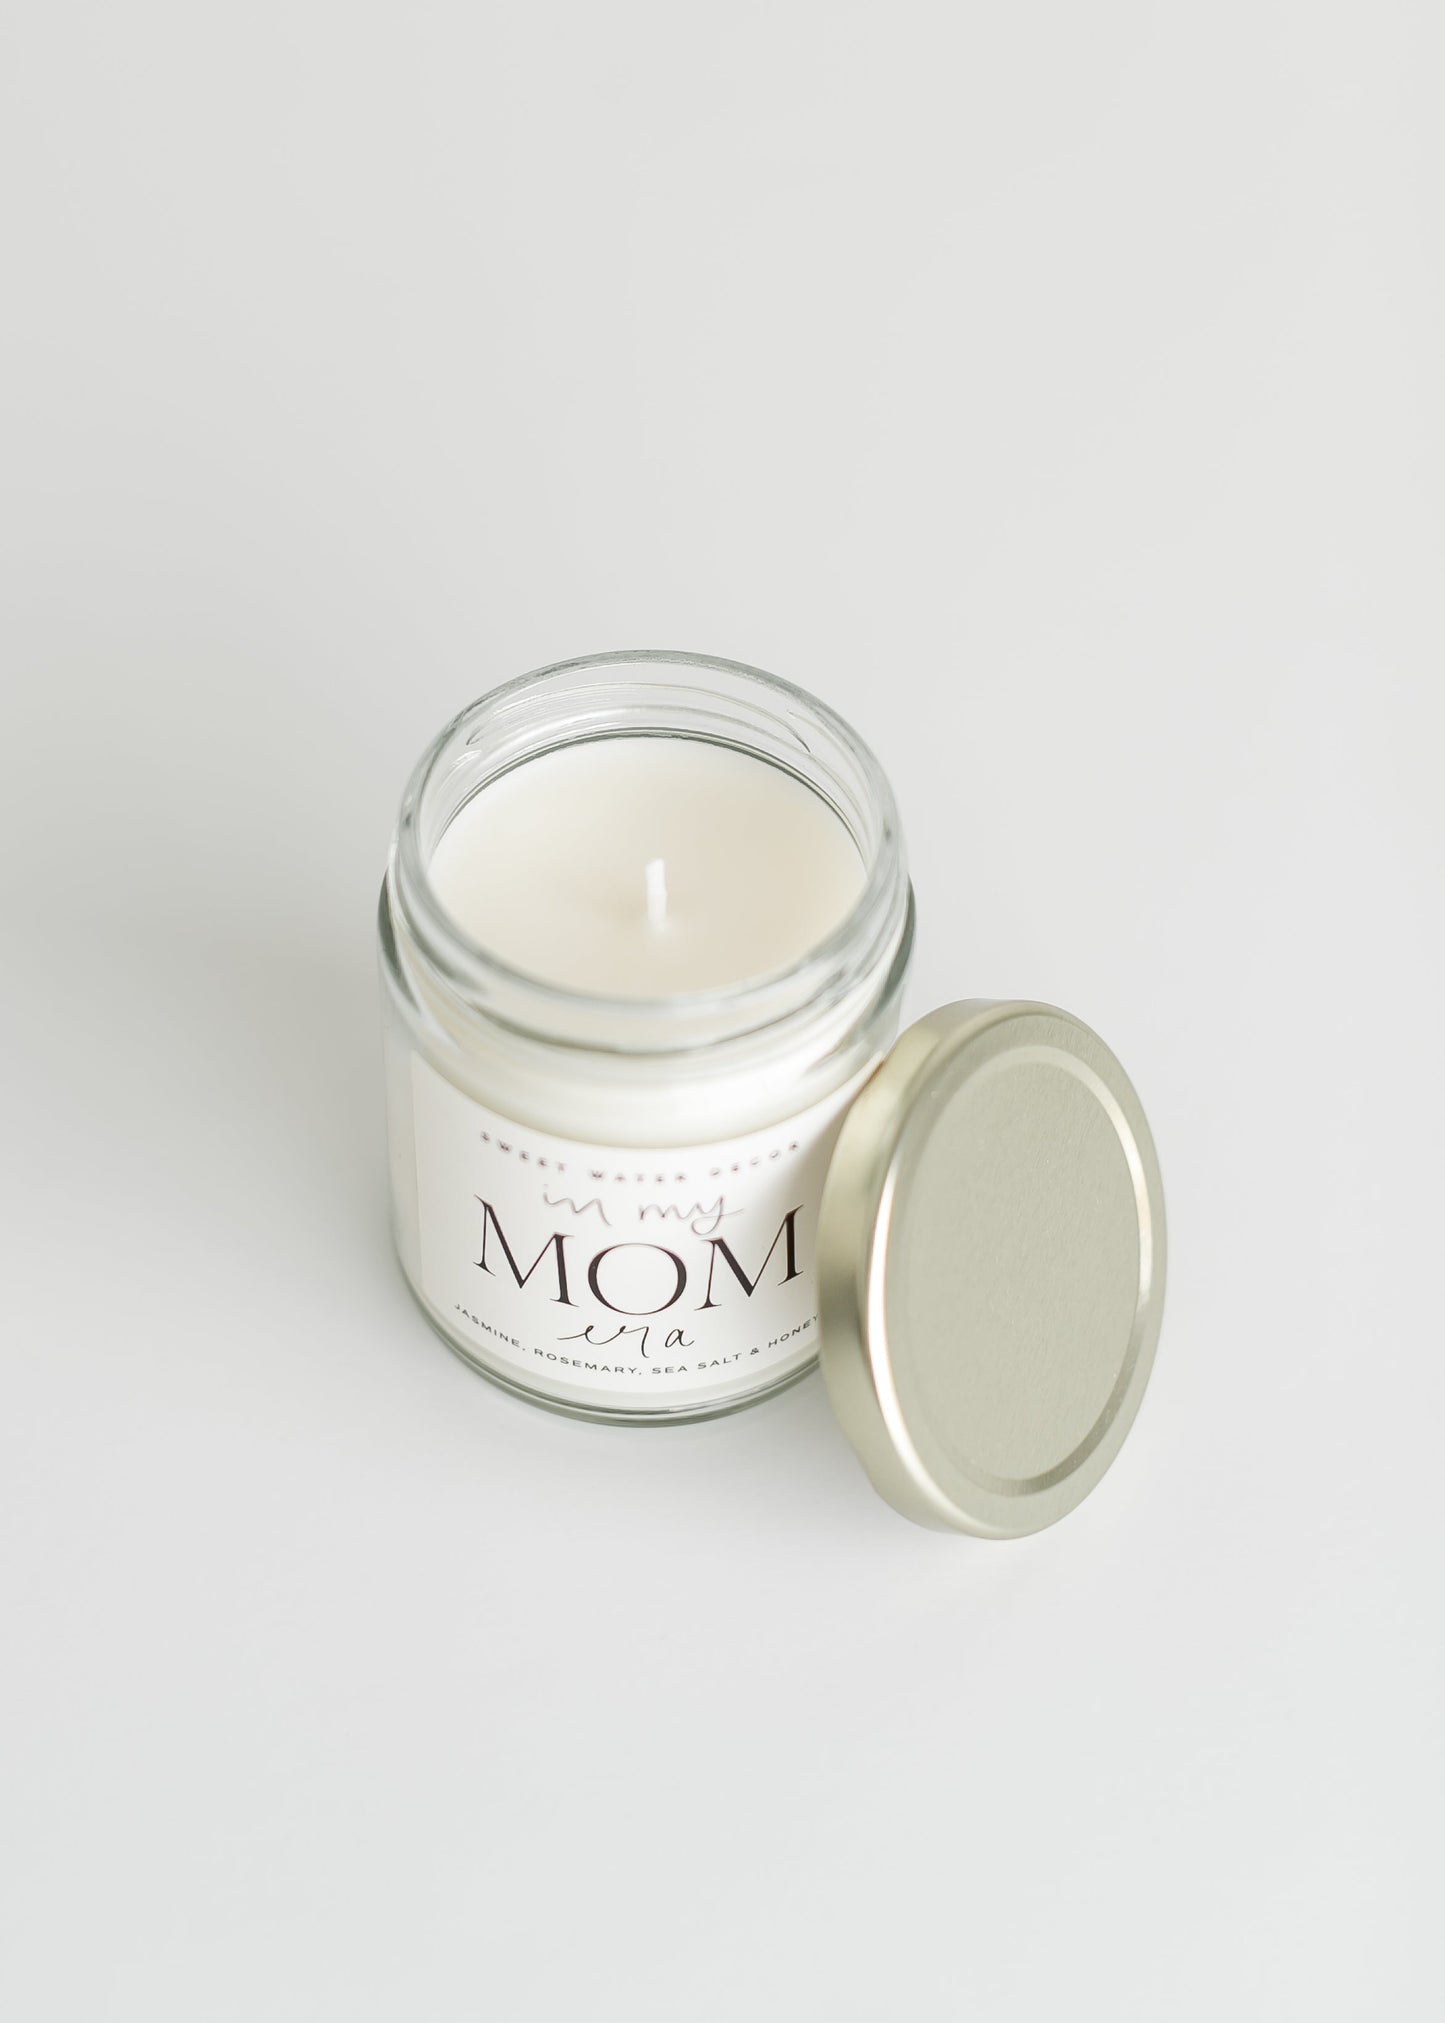 In My Mom Era Soy 9oz Candle Gifts